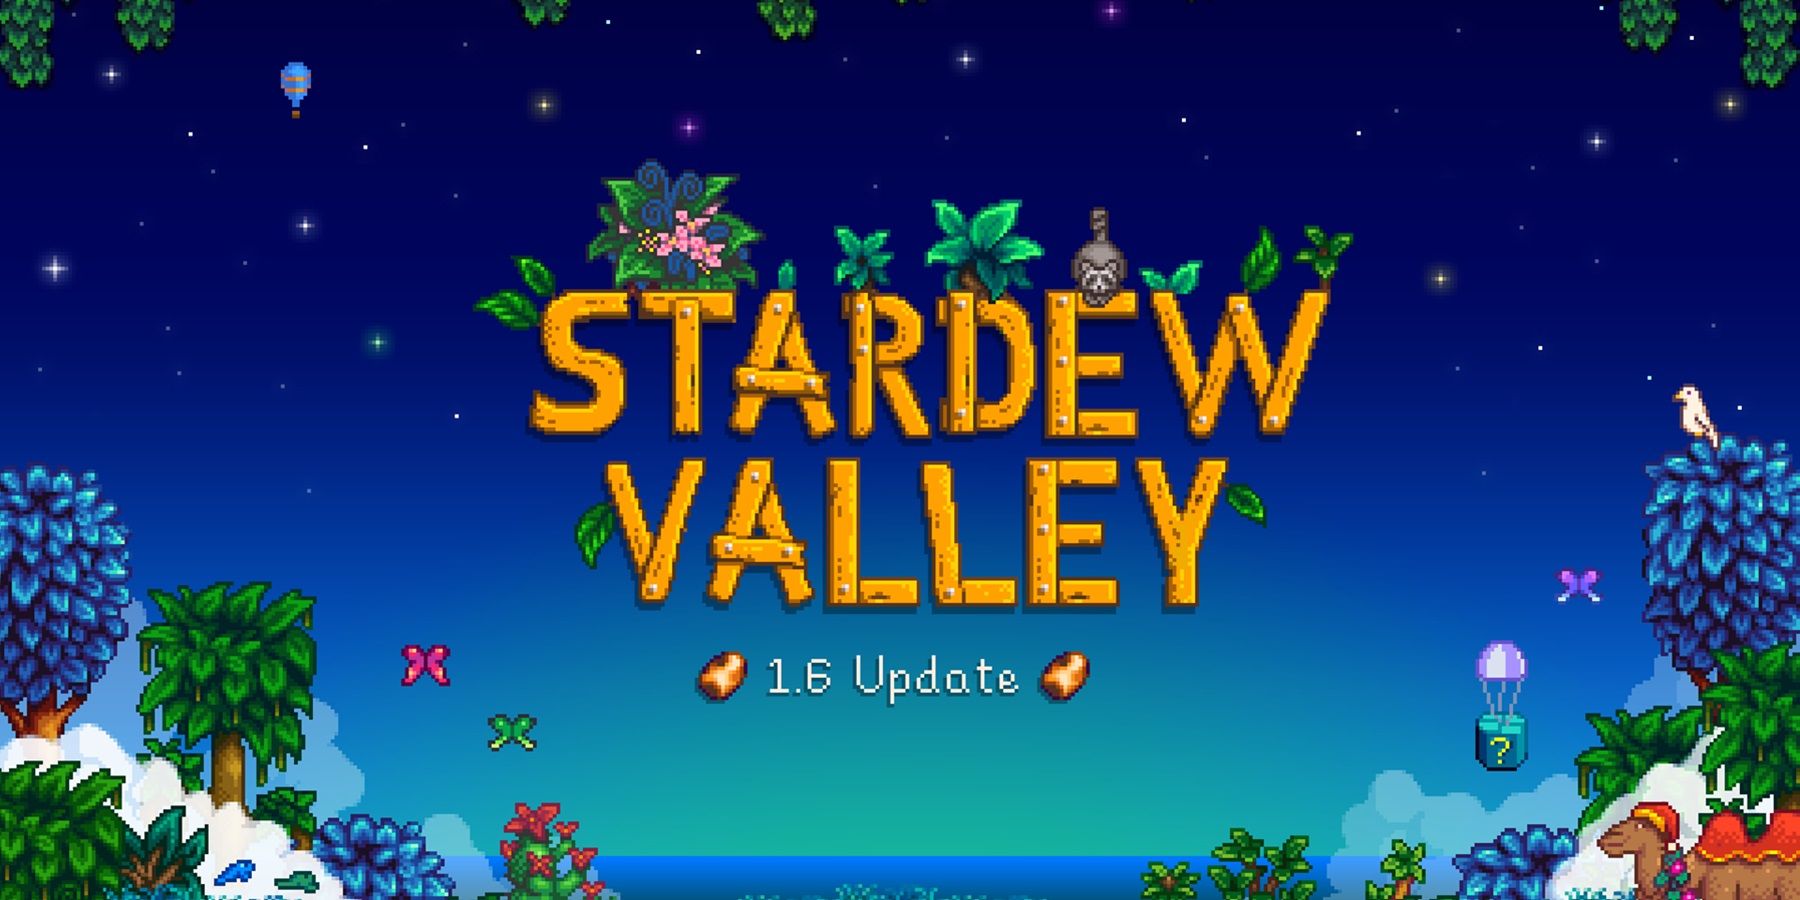 Stardew Valley Update 1.6 Patch Notes Revealed